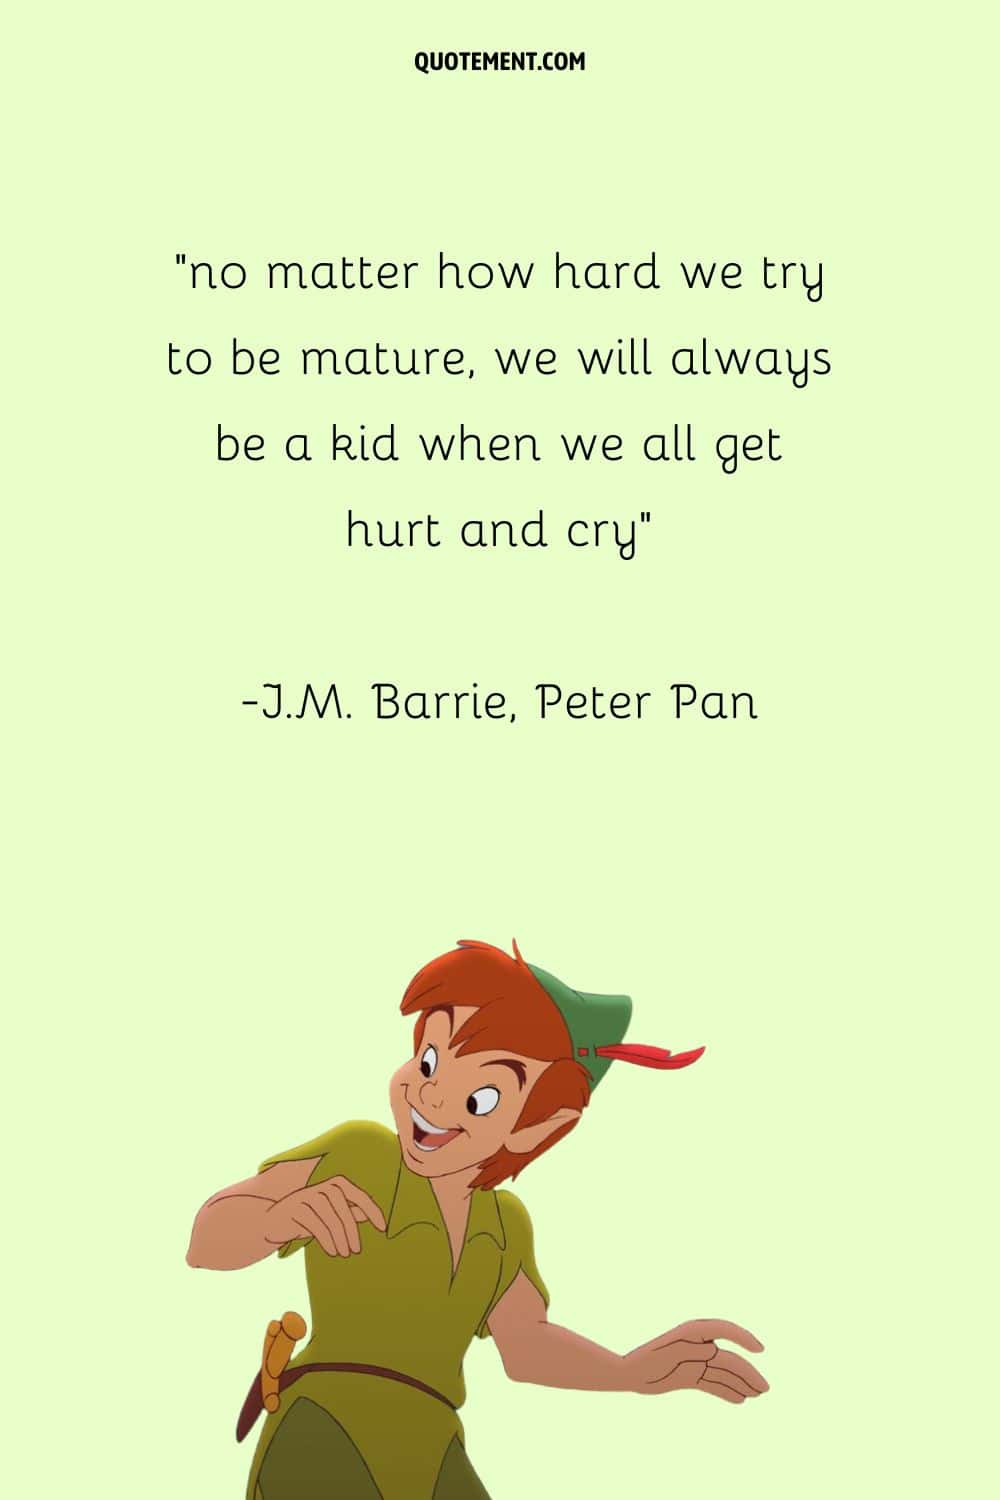 “no matter how hard we try to be mature, we will always be a kid when we all get hurt and cry” ― J.M. Barrie, Peter Pan